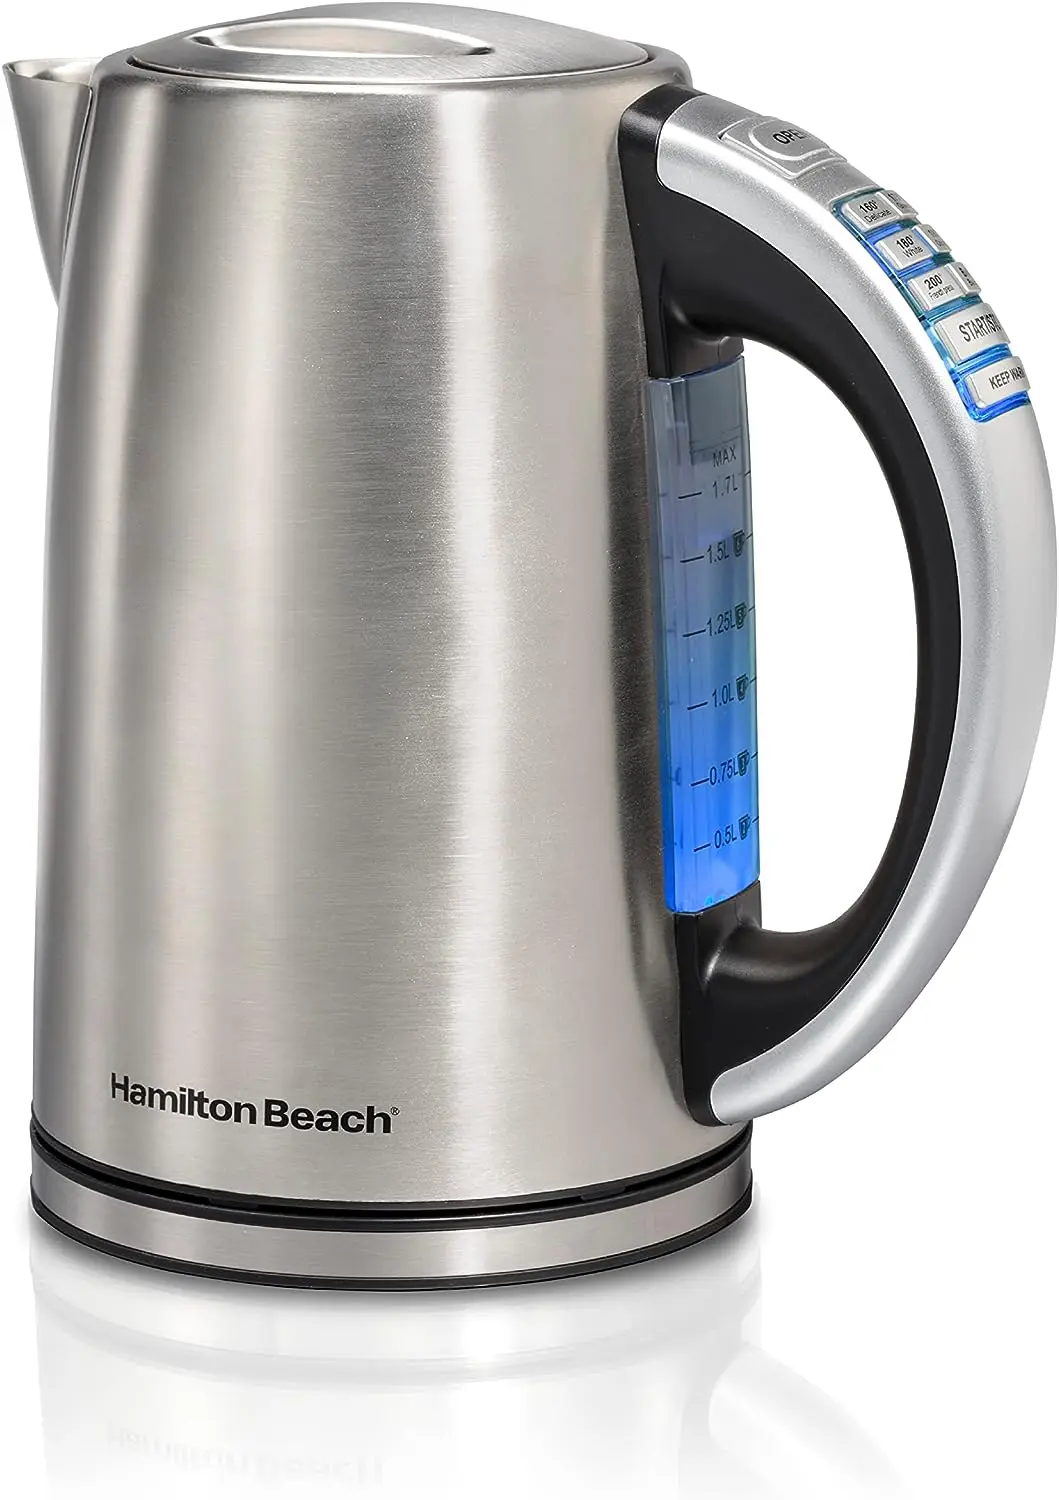 

Temperature Control Tea Kettle, Water Boiler & Heater, 1.7 Liter, Fast 1500 Watts, BPA Free, Cordless, Auto-Shutoff and Boi Her